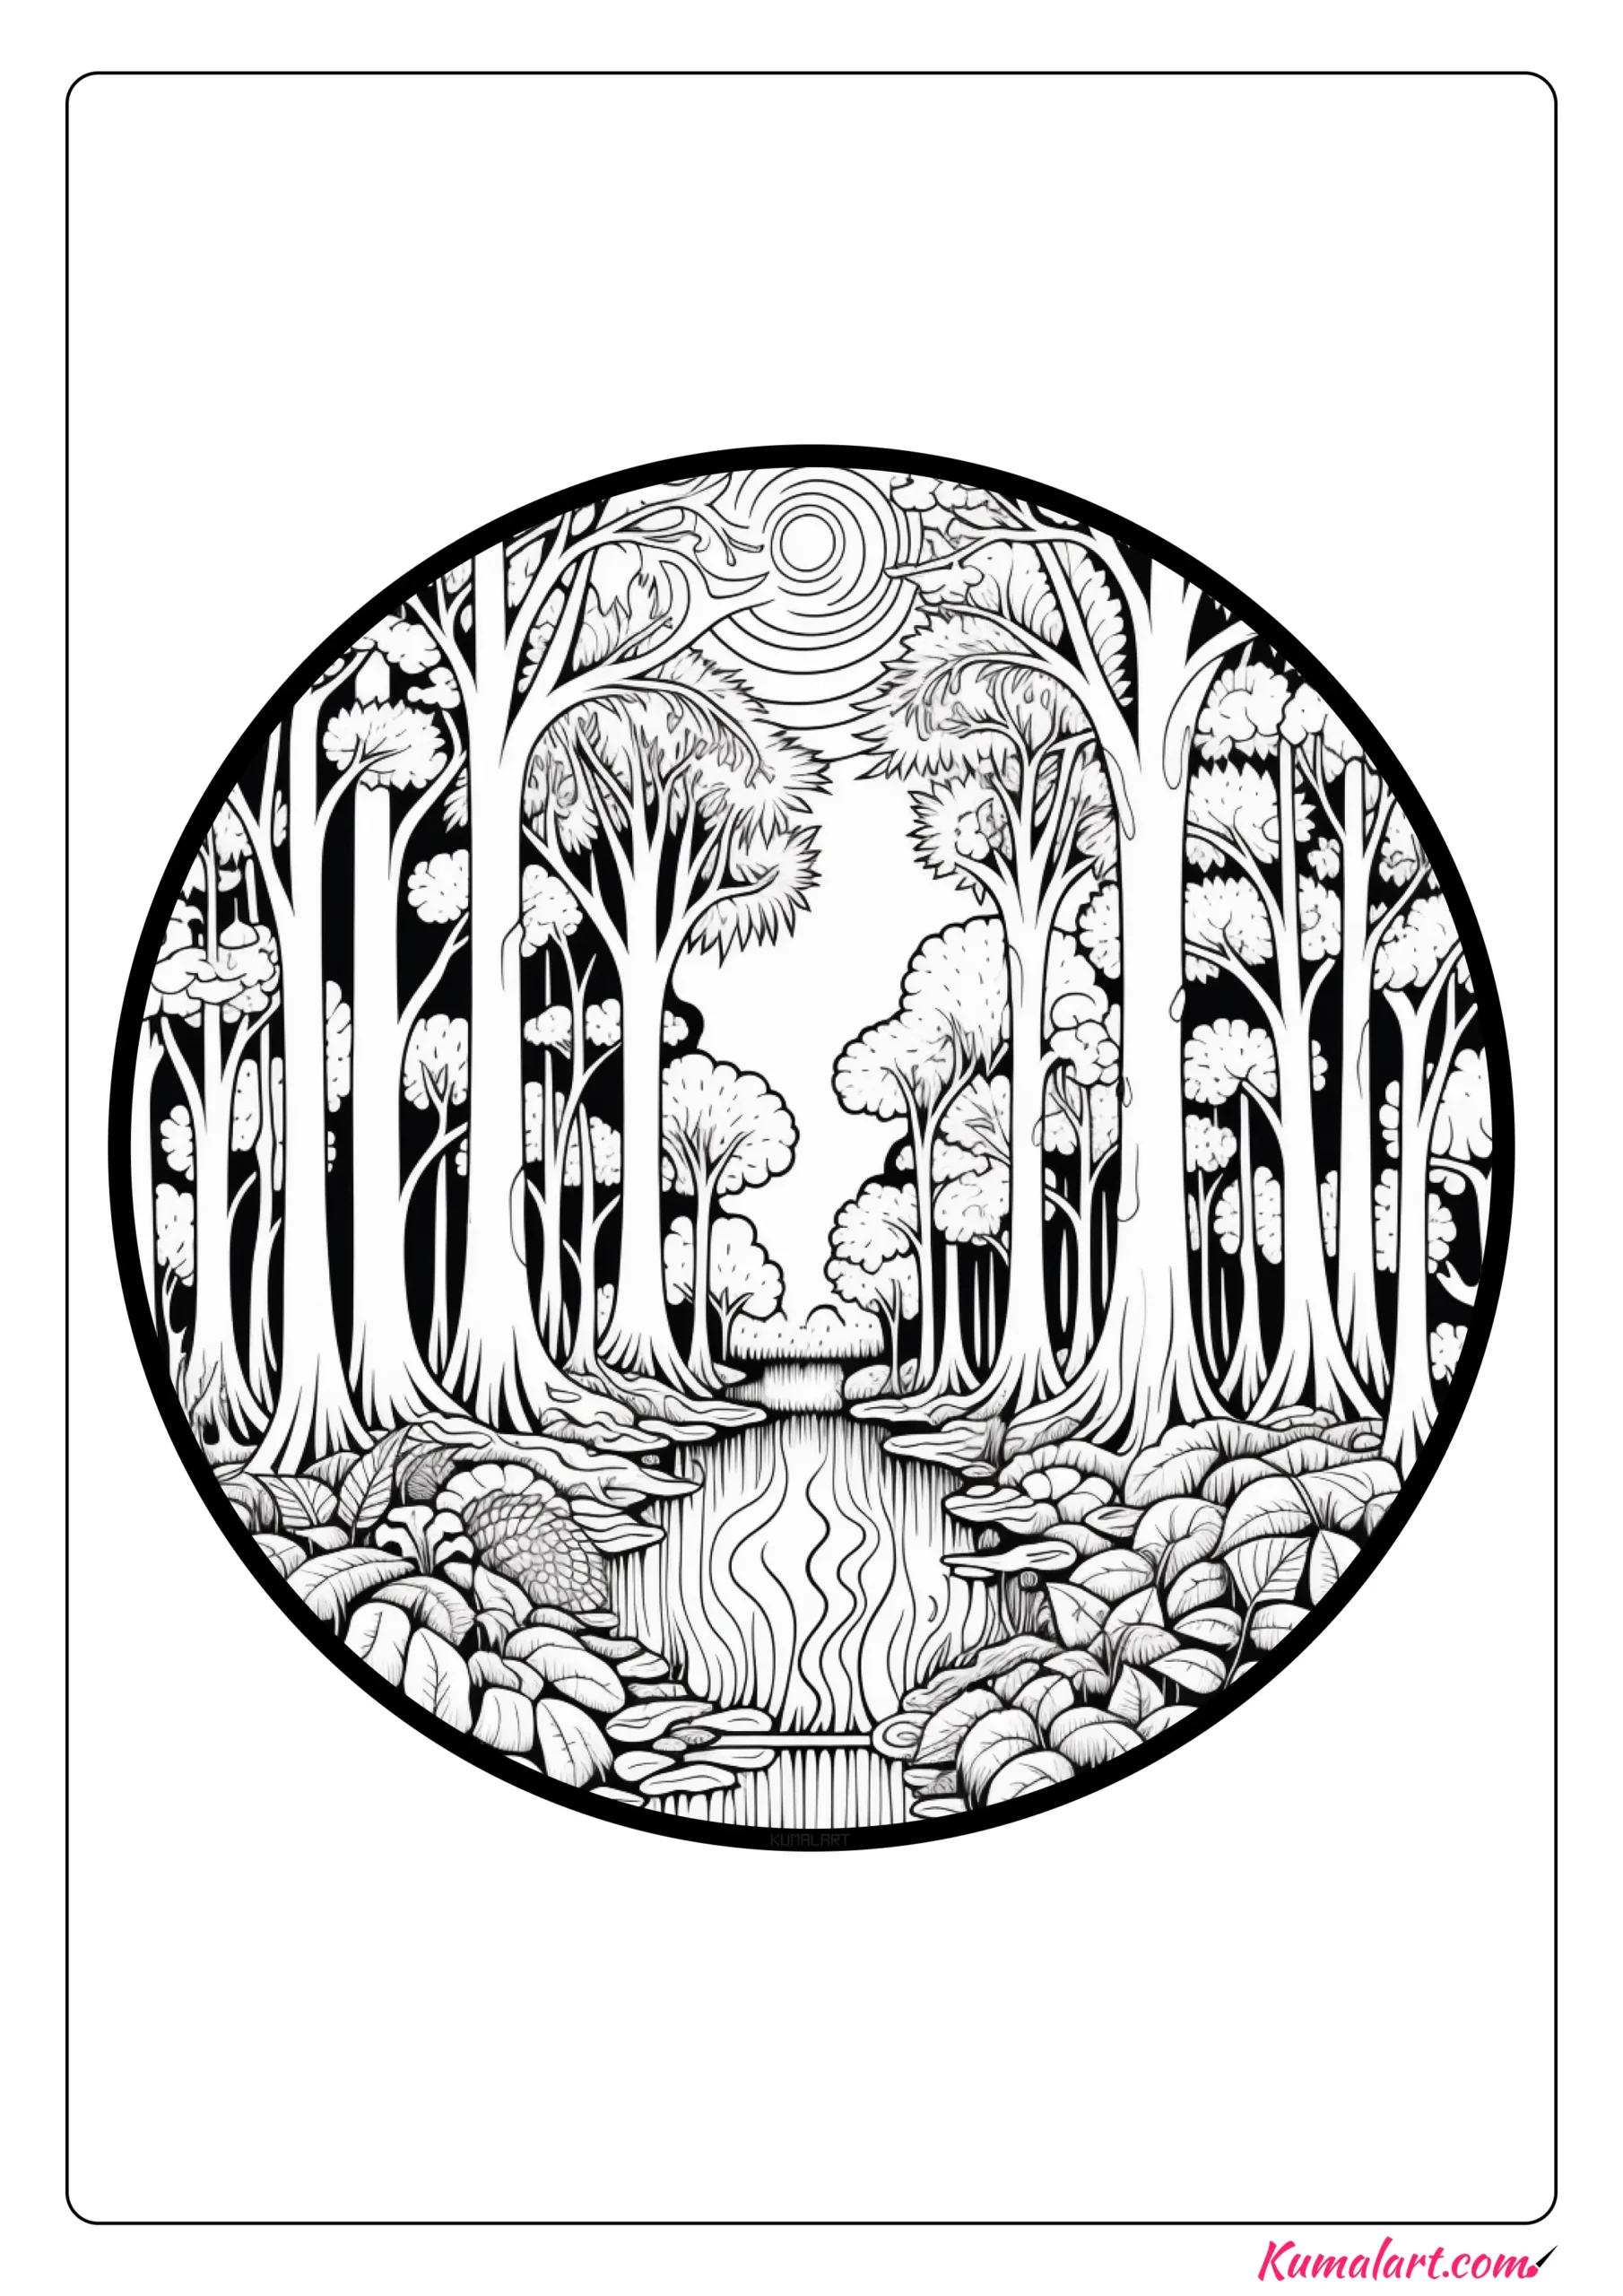 Lush Rainforest Coloring Page